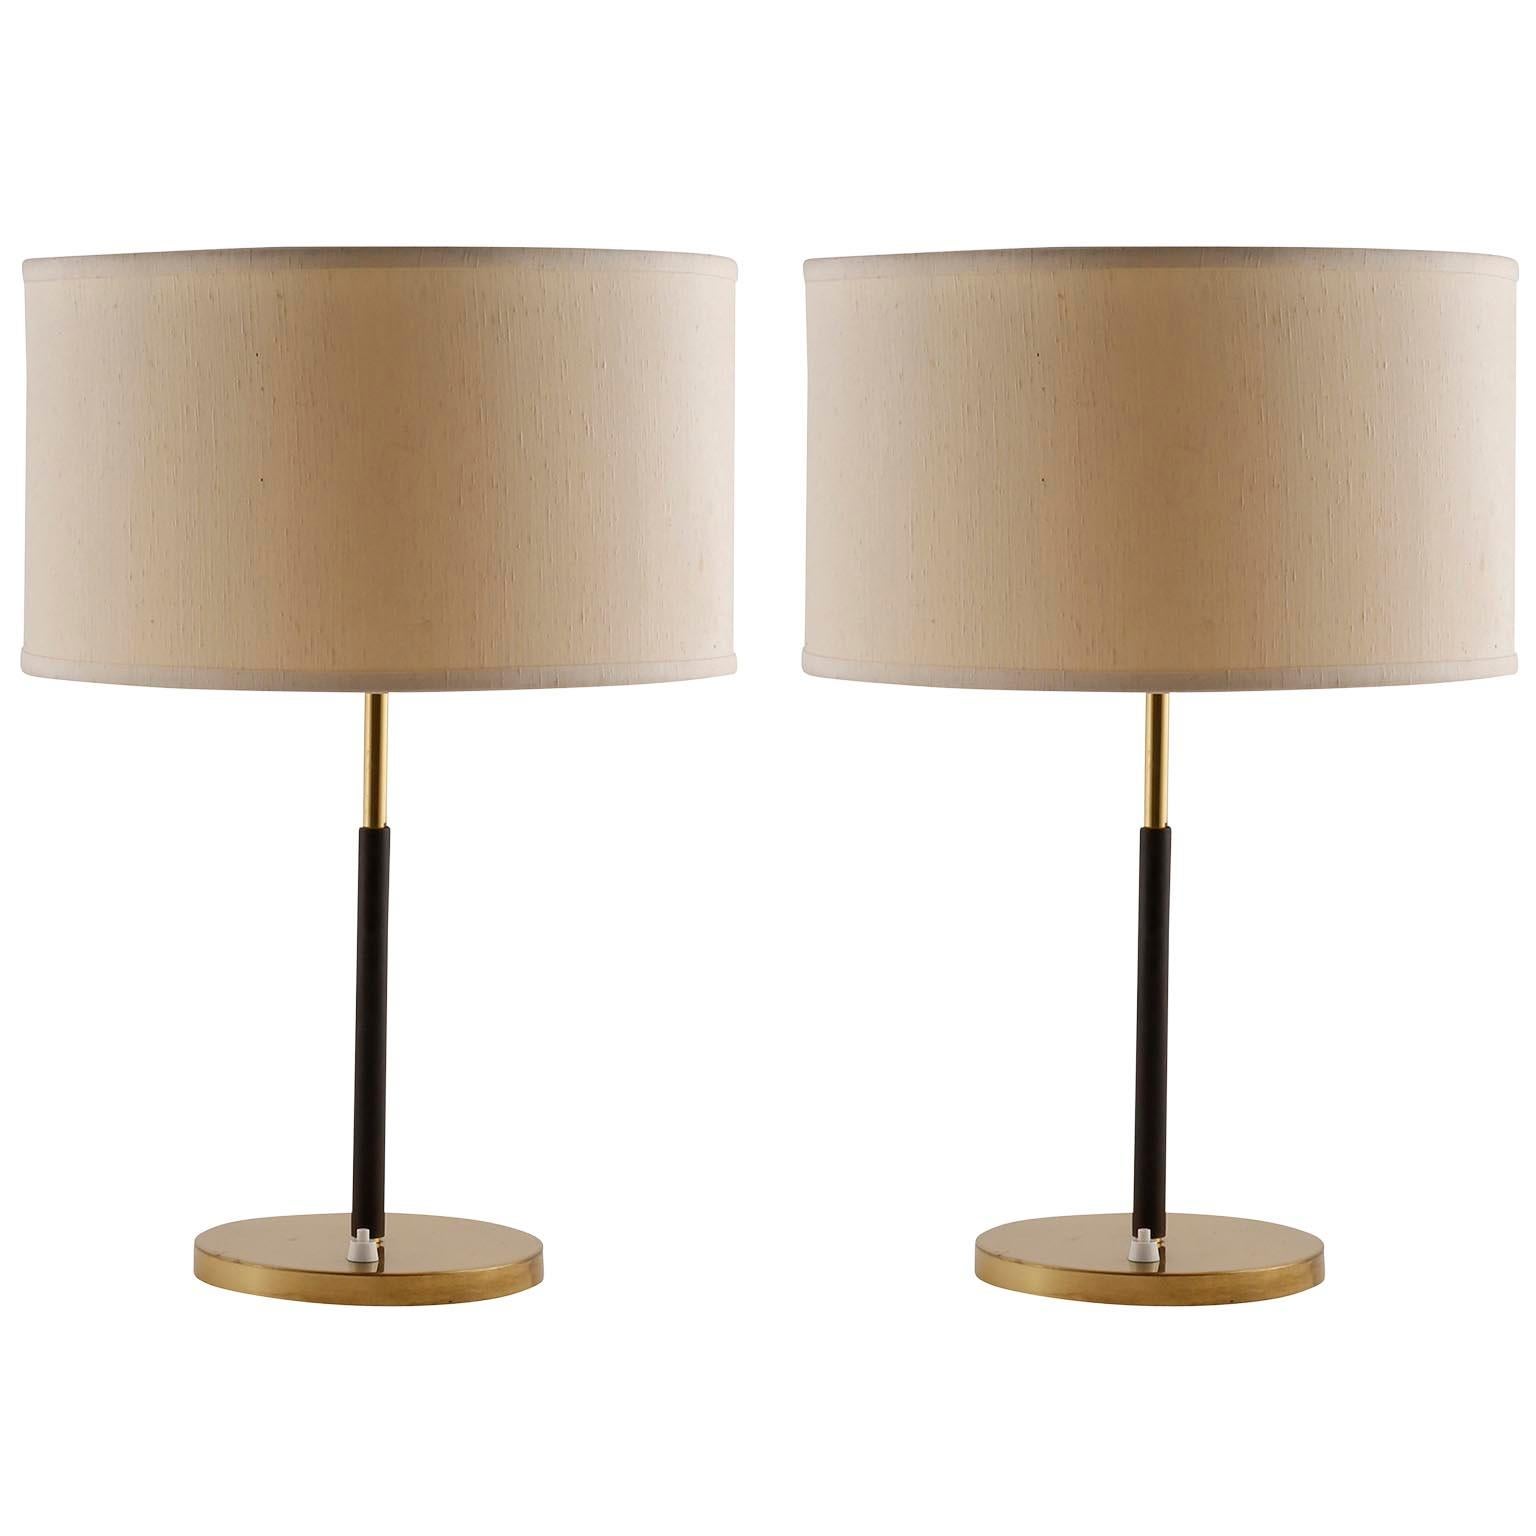 A pair of table lamps by J.T. Kalmar, manufactured in midcentury, circa 1960.
They are made of a brass covered base, a covered stand with dark brown leather, brass fittings, and a cream colored lampshade.
Each lamp takes two medium or standard screw